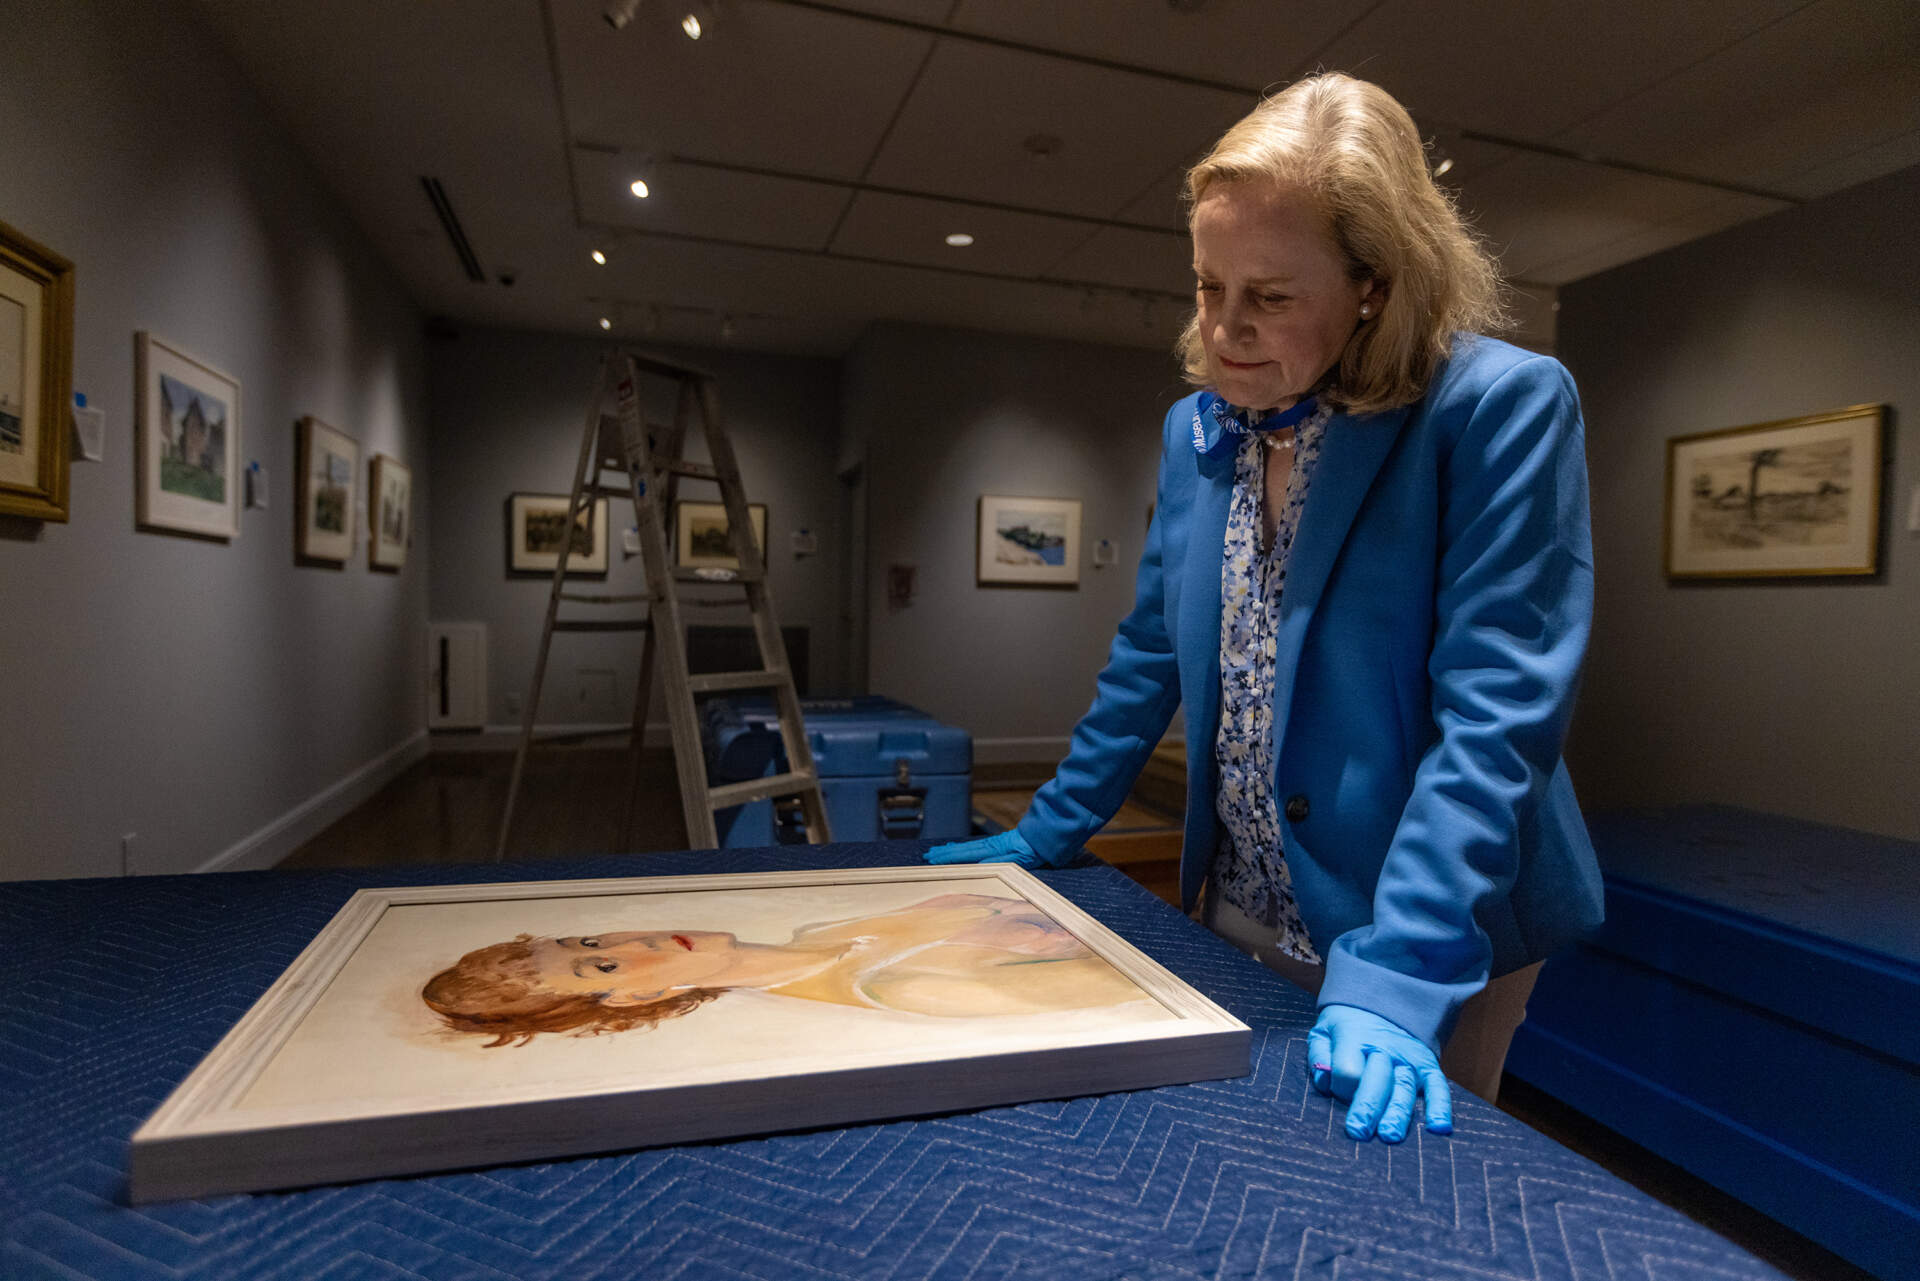 Curator Elliot Bostwick Davis looks at Josephine Hopper’s self-portrait before it’s to be hung on the wall as part of the exhibit “Edward Hopper &amp; Cape Ann: Illuminating an American Landscape” at the Cape Ann Museum in Gloucester. (Jesse Costa/WBUR)